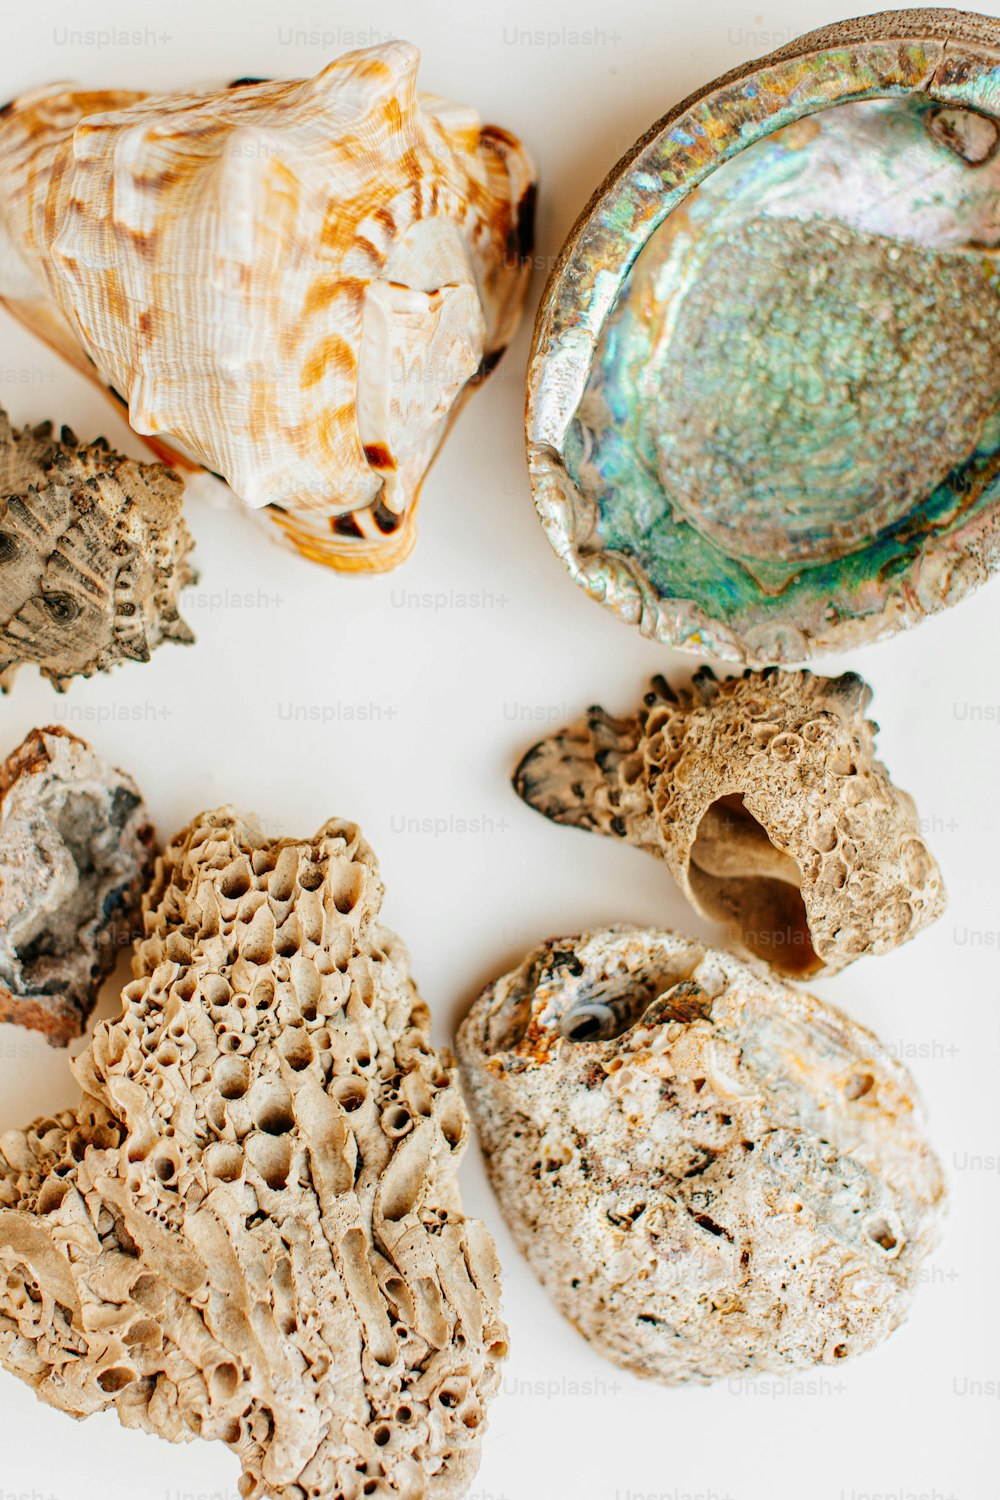 a group of sea shells on a white surface